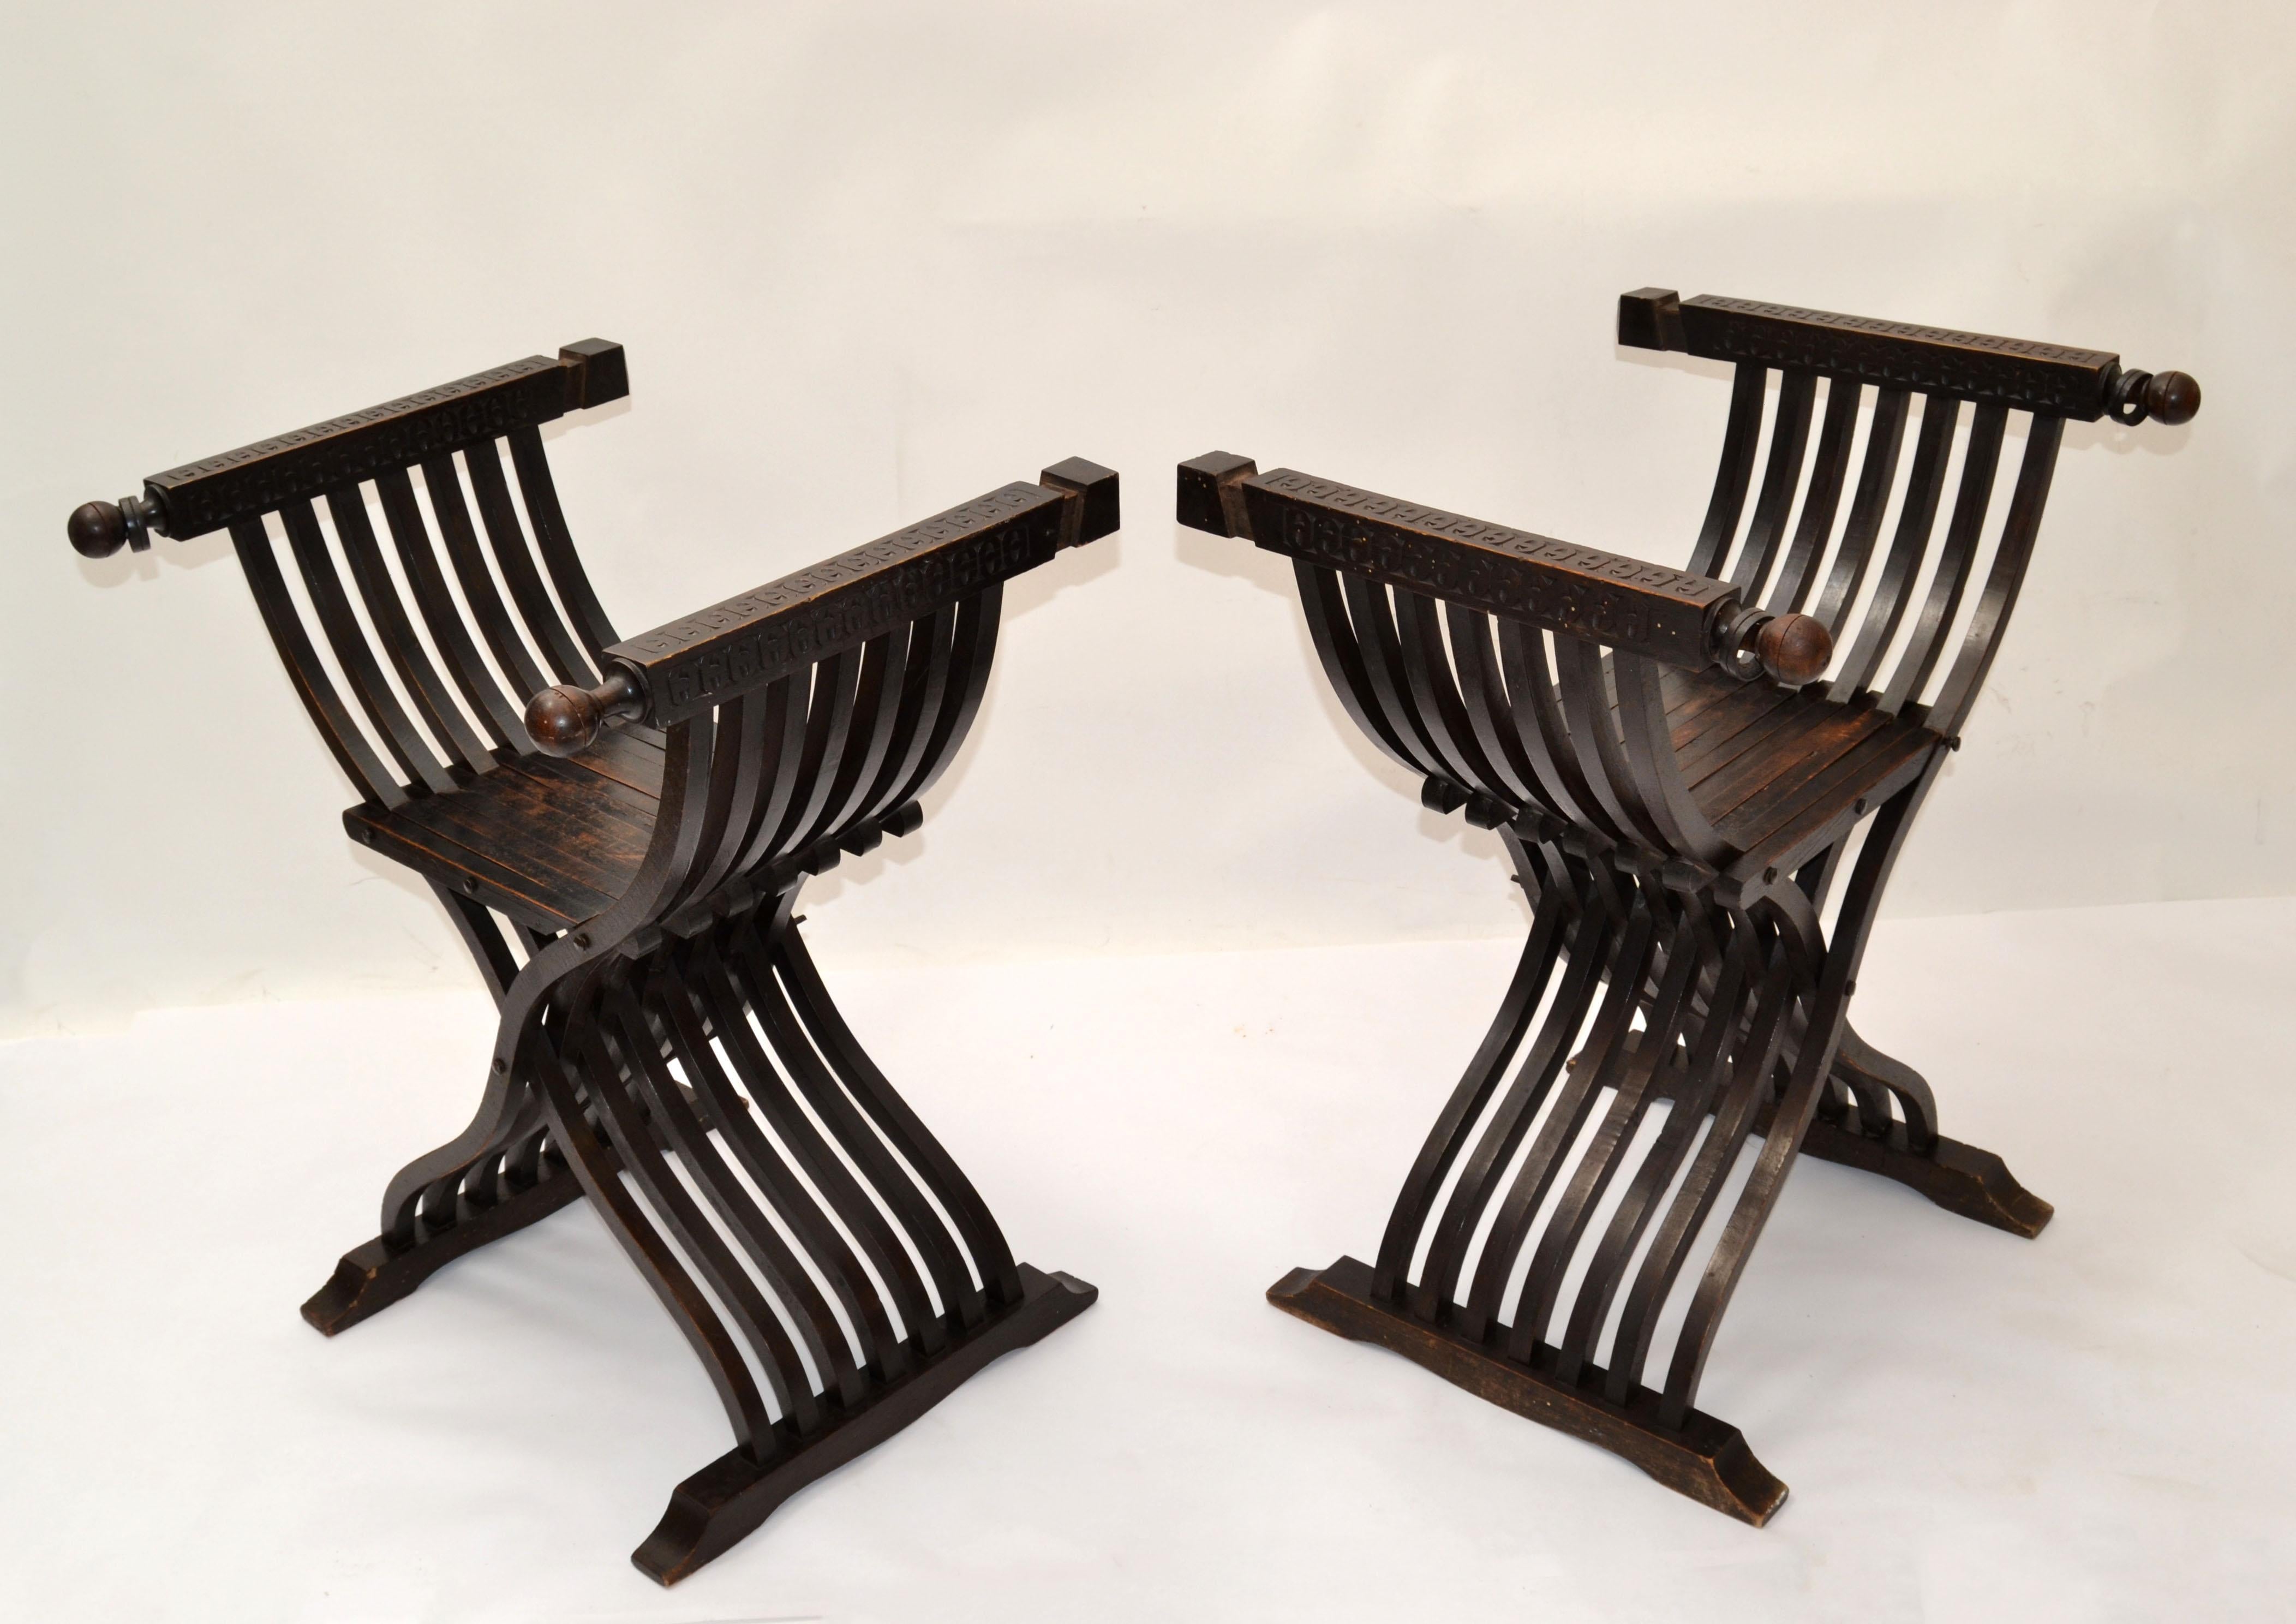 19th century carved walnut folding scissors Savonarola armchair or settee featuring hand carved armrests. 
Typical of the Italian Renaissance with carved Florentine backs, this pair has none.
The Savonarola chair is a type of folding chair with an